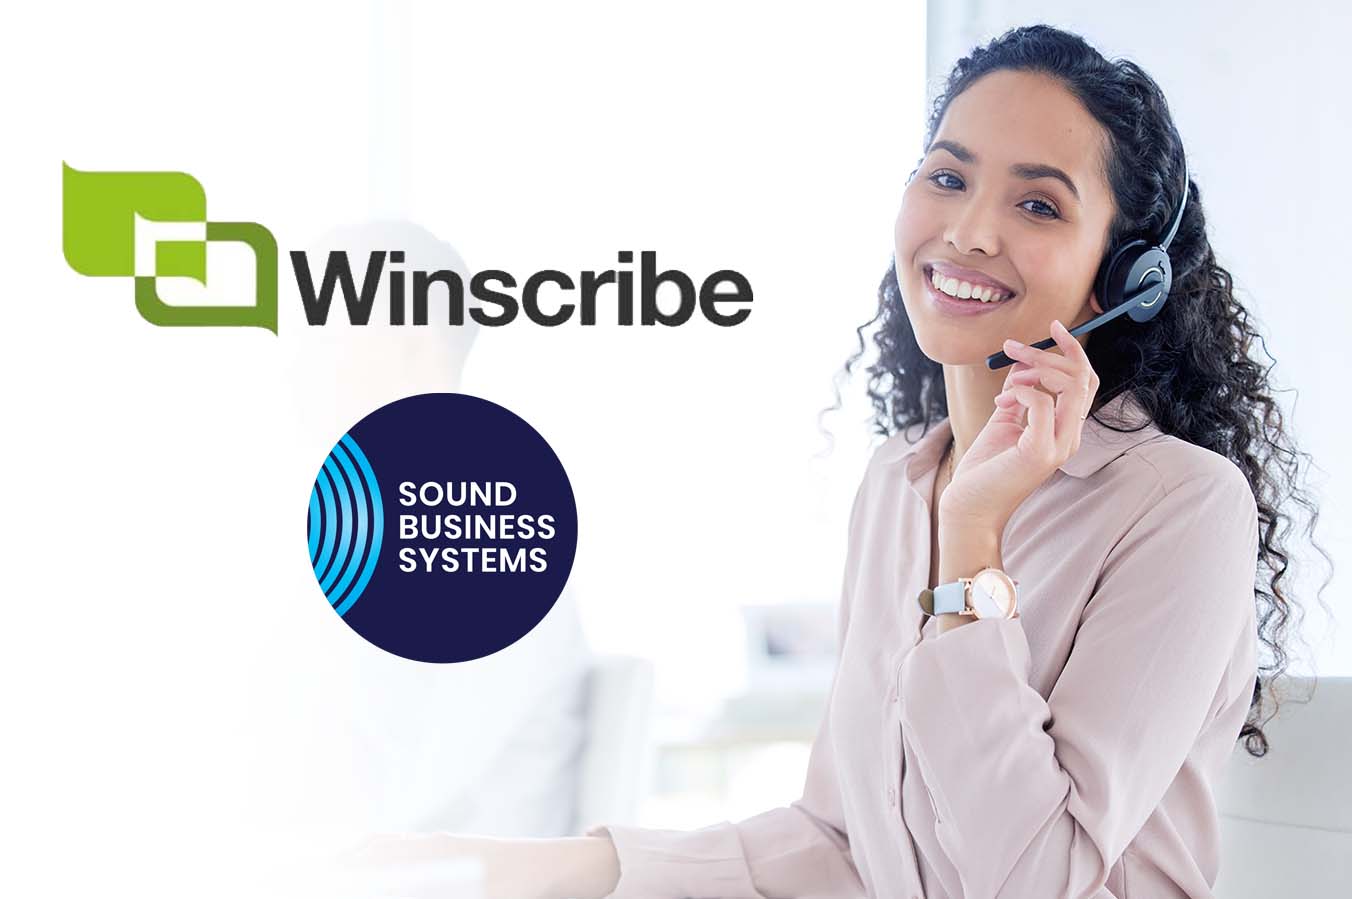 Winscribe is here to stay